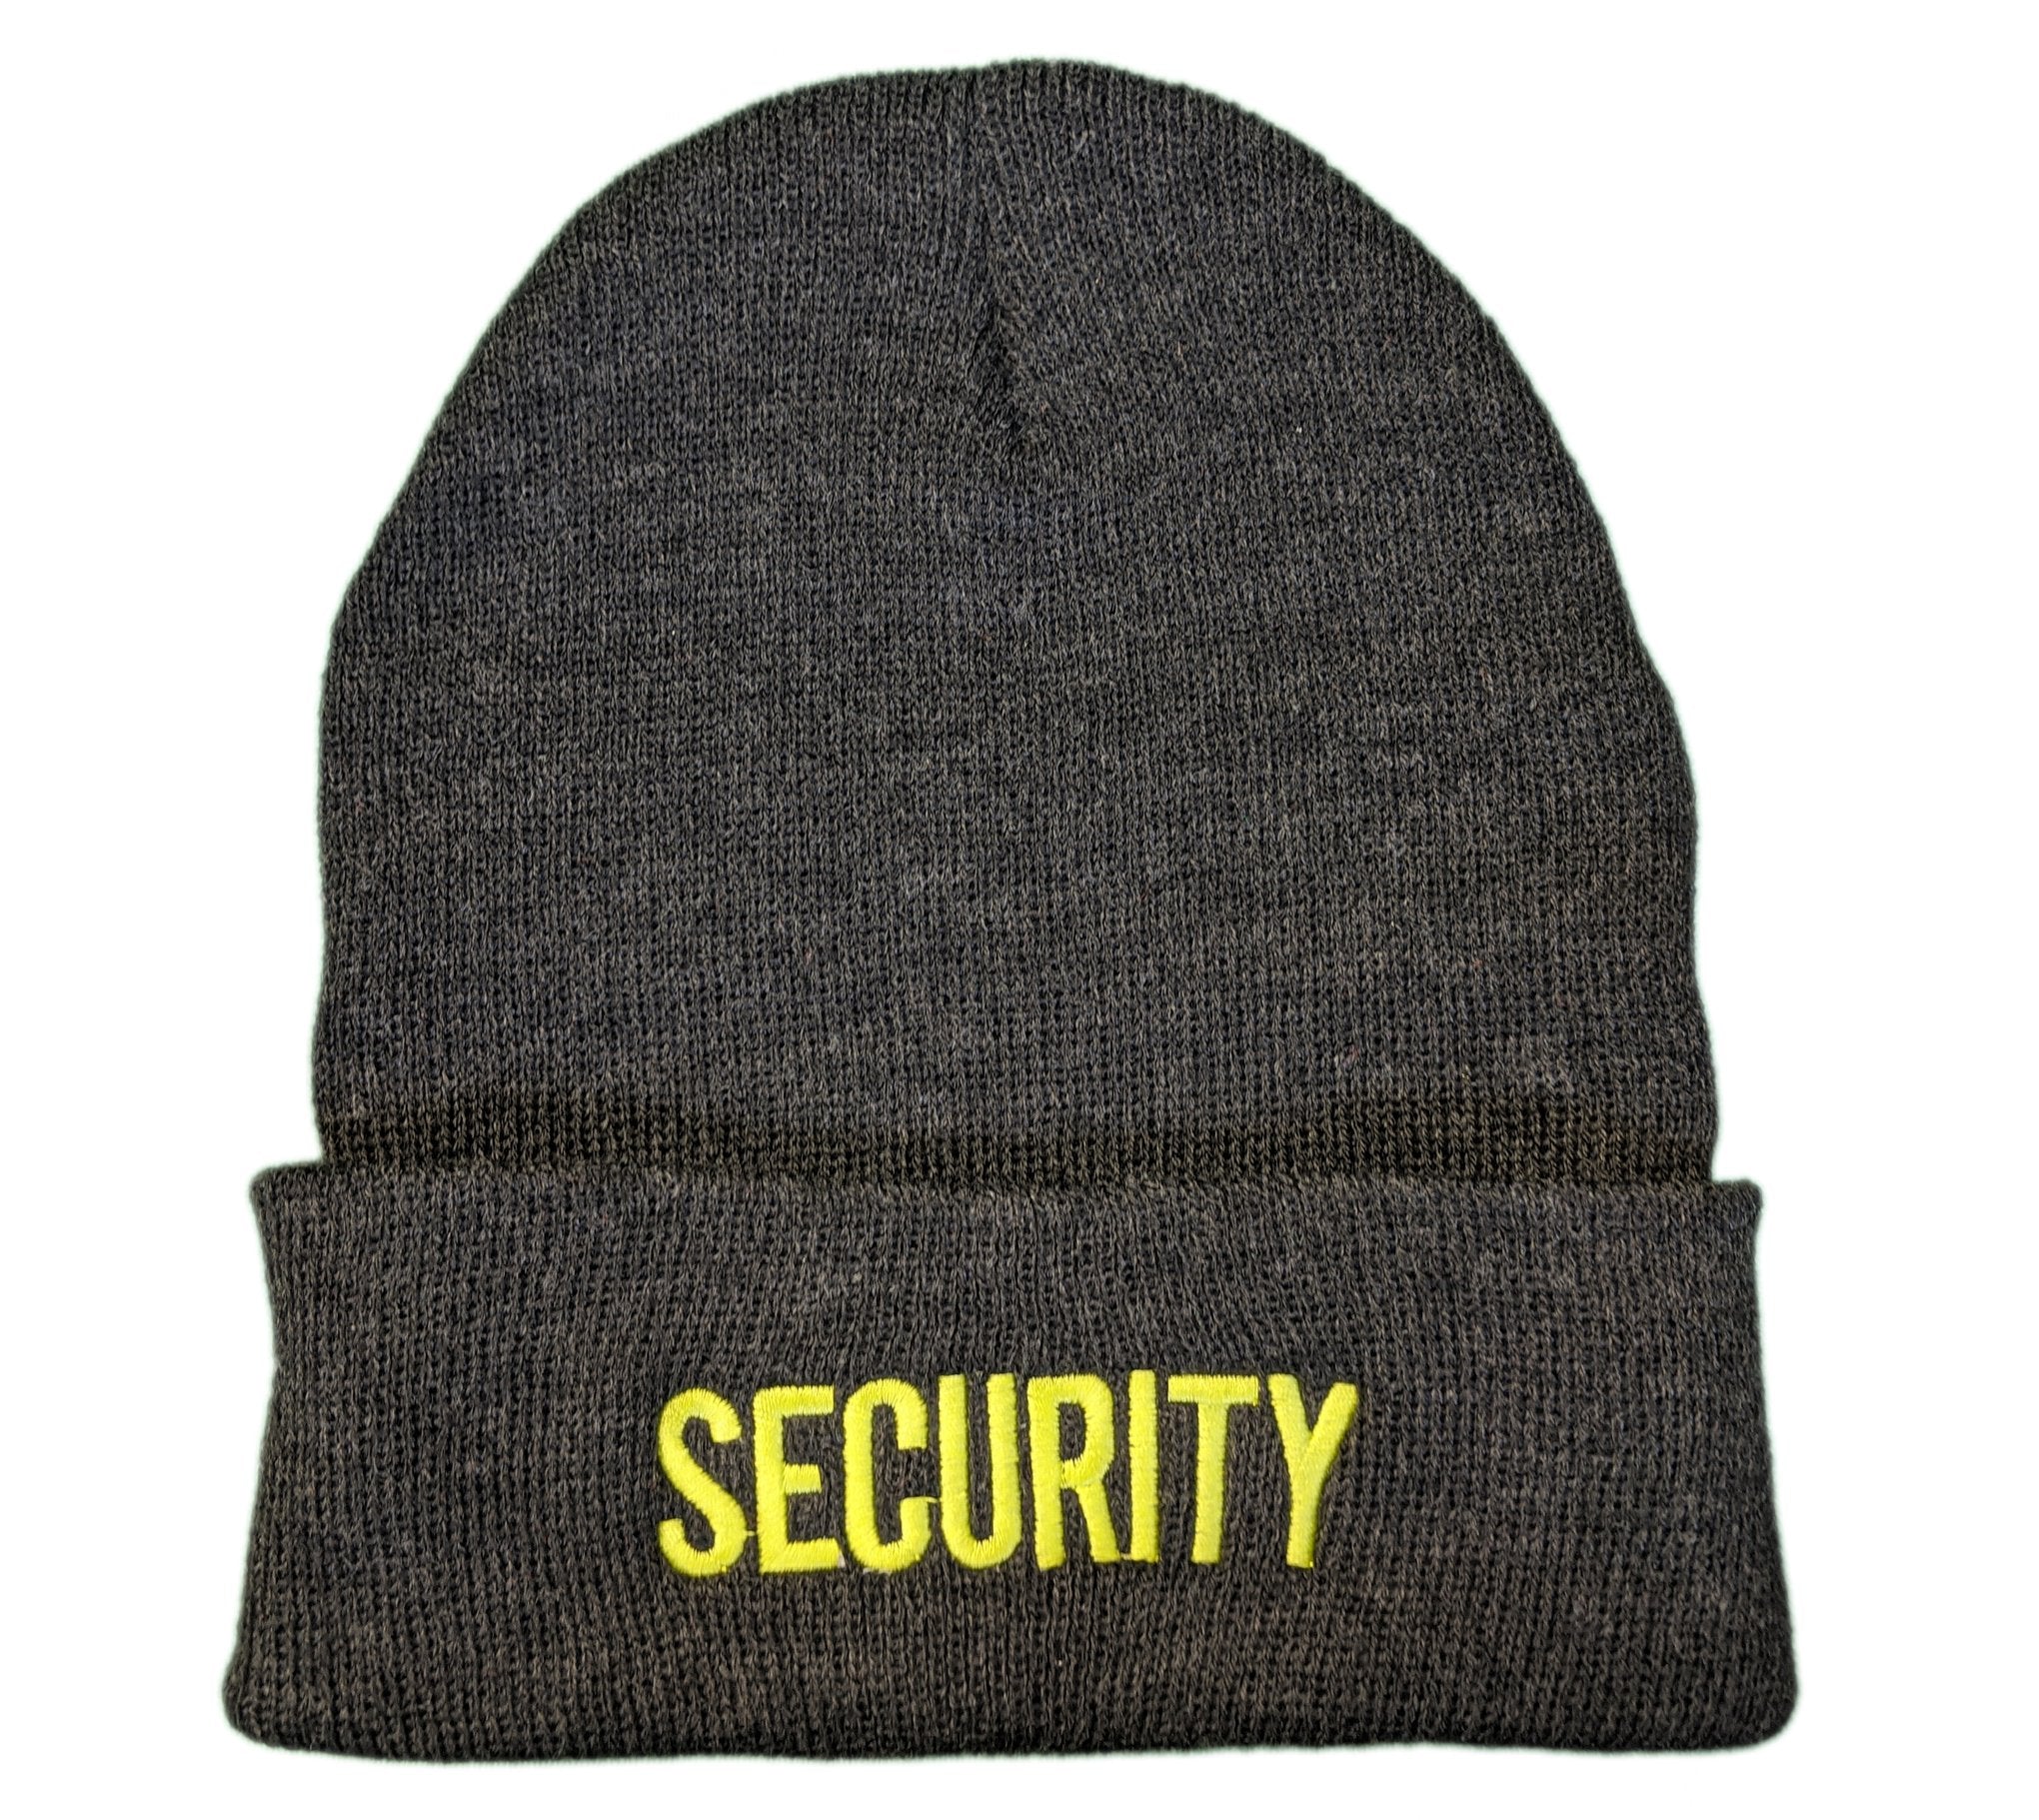 Men's Security Beanie (Charcoal / Neon)